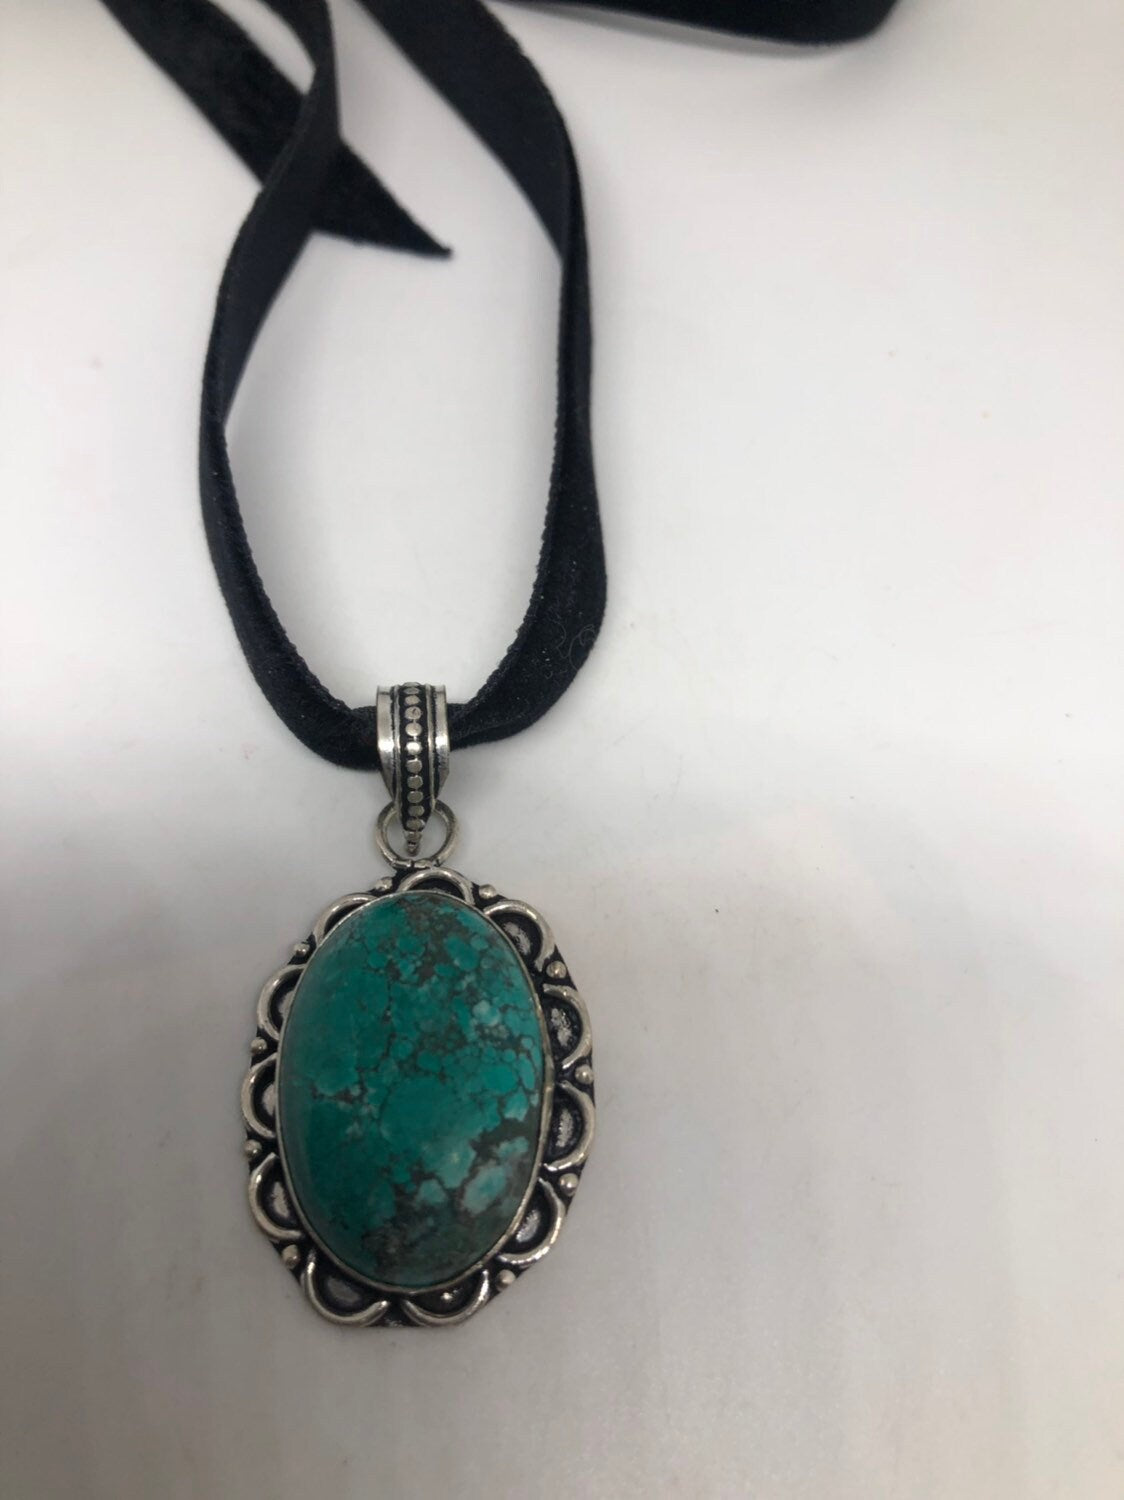 Blue Handmade Gothic Styled Silver Finished Genuine Tibetan Turquoise Choker Necklace